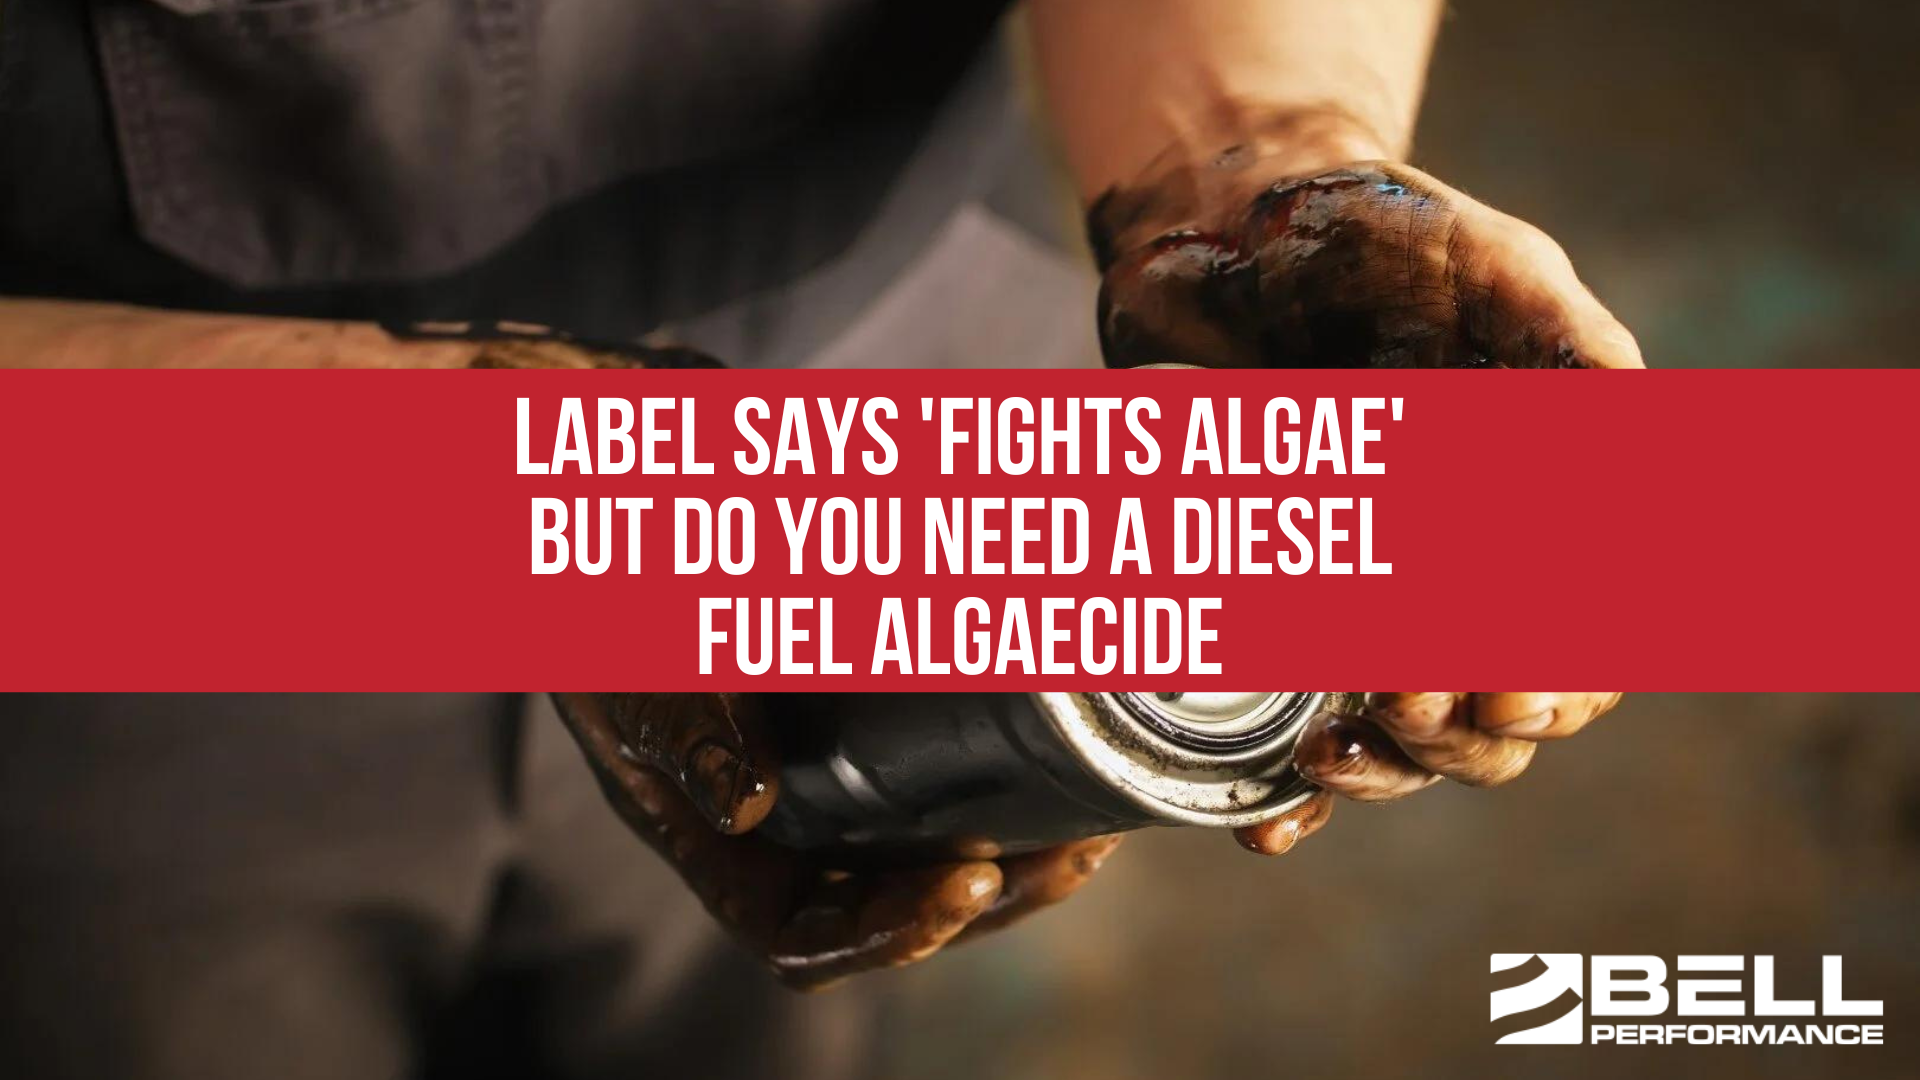 Label Says 'Fights Algae' But Do You Need A Diesel Fuel Algaecide